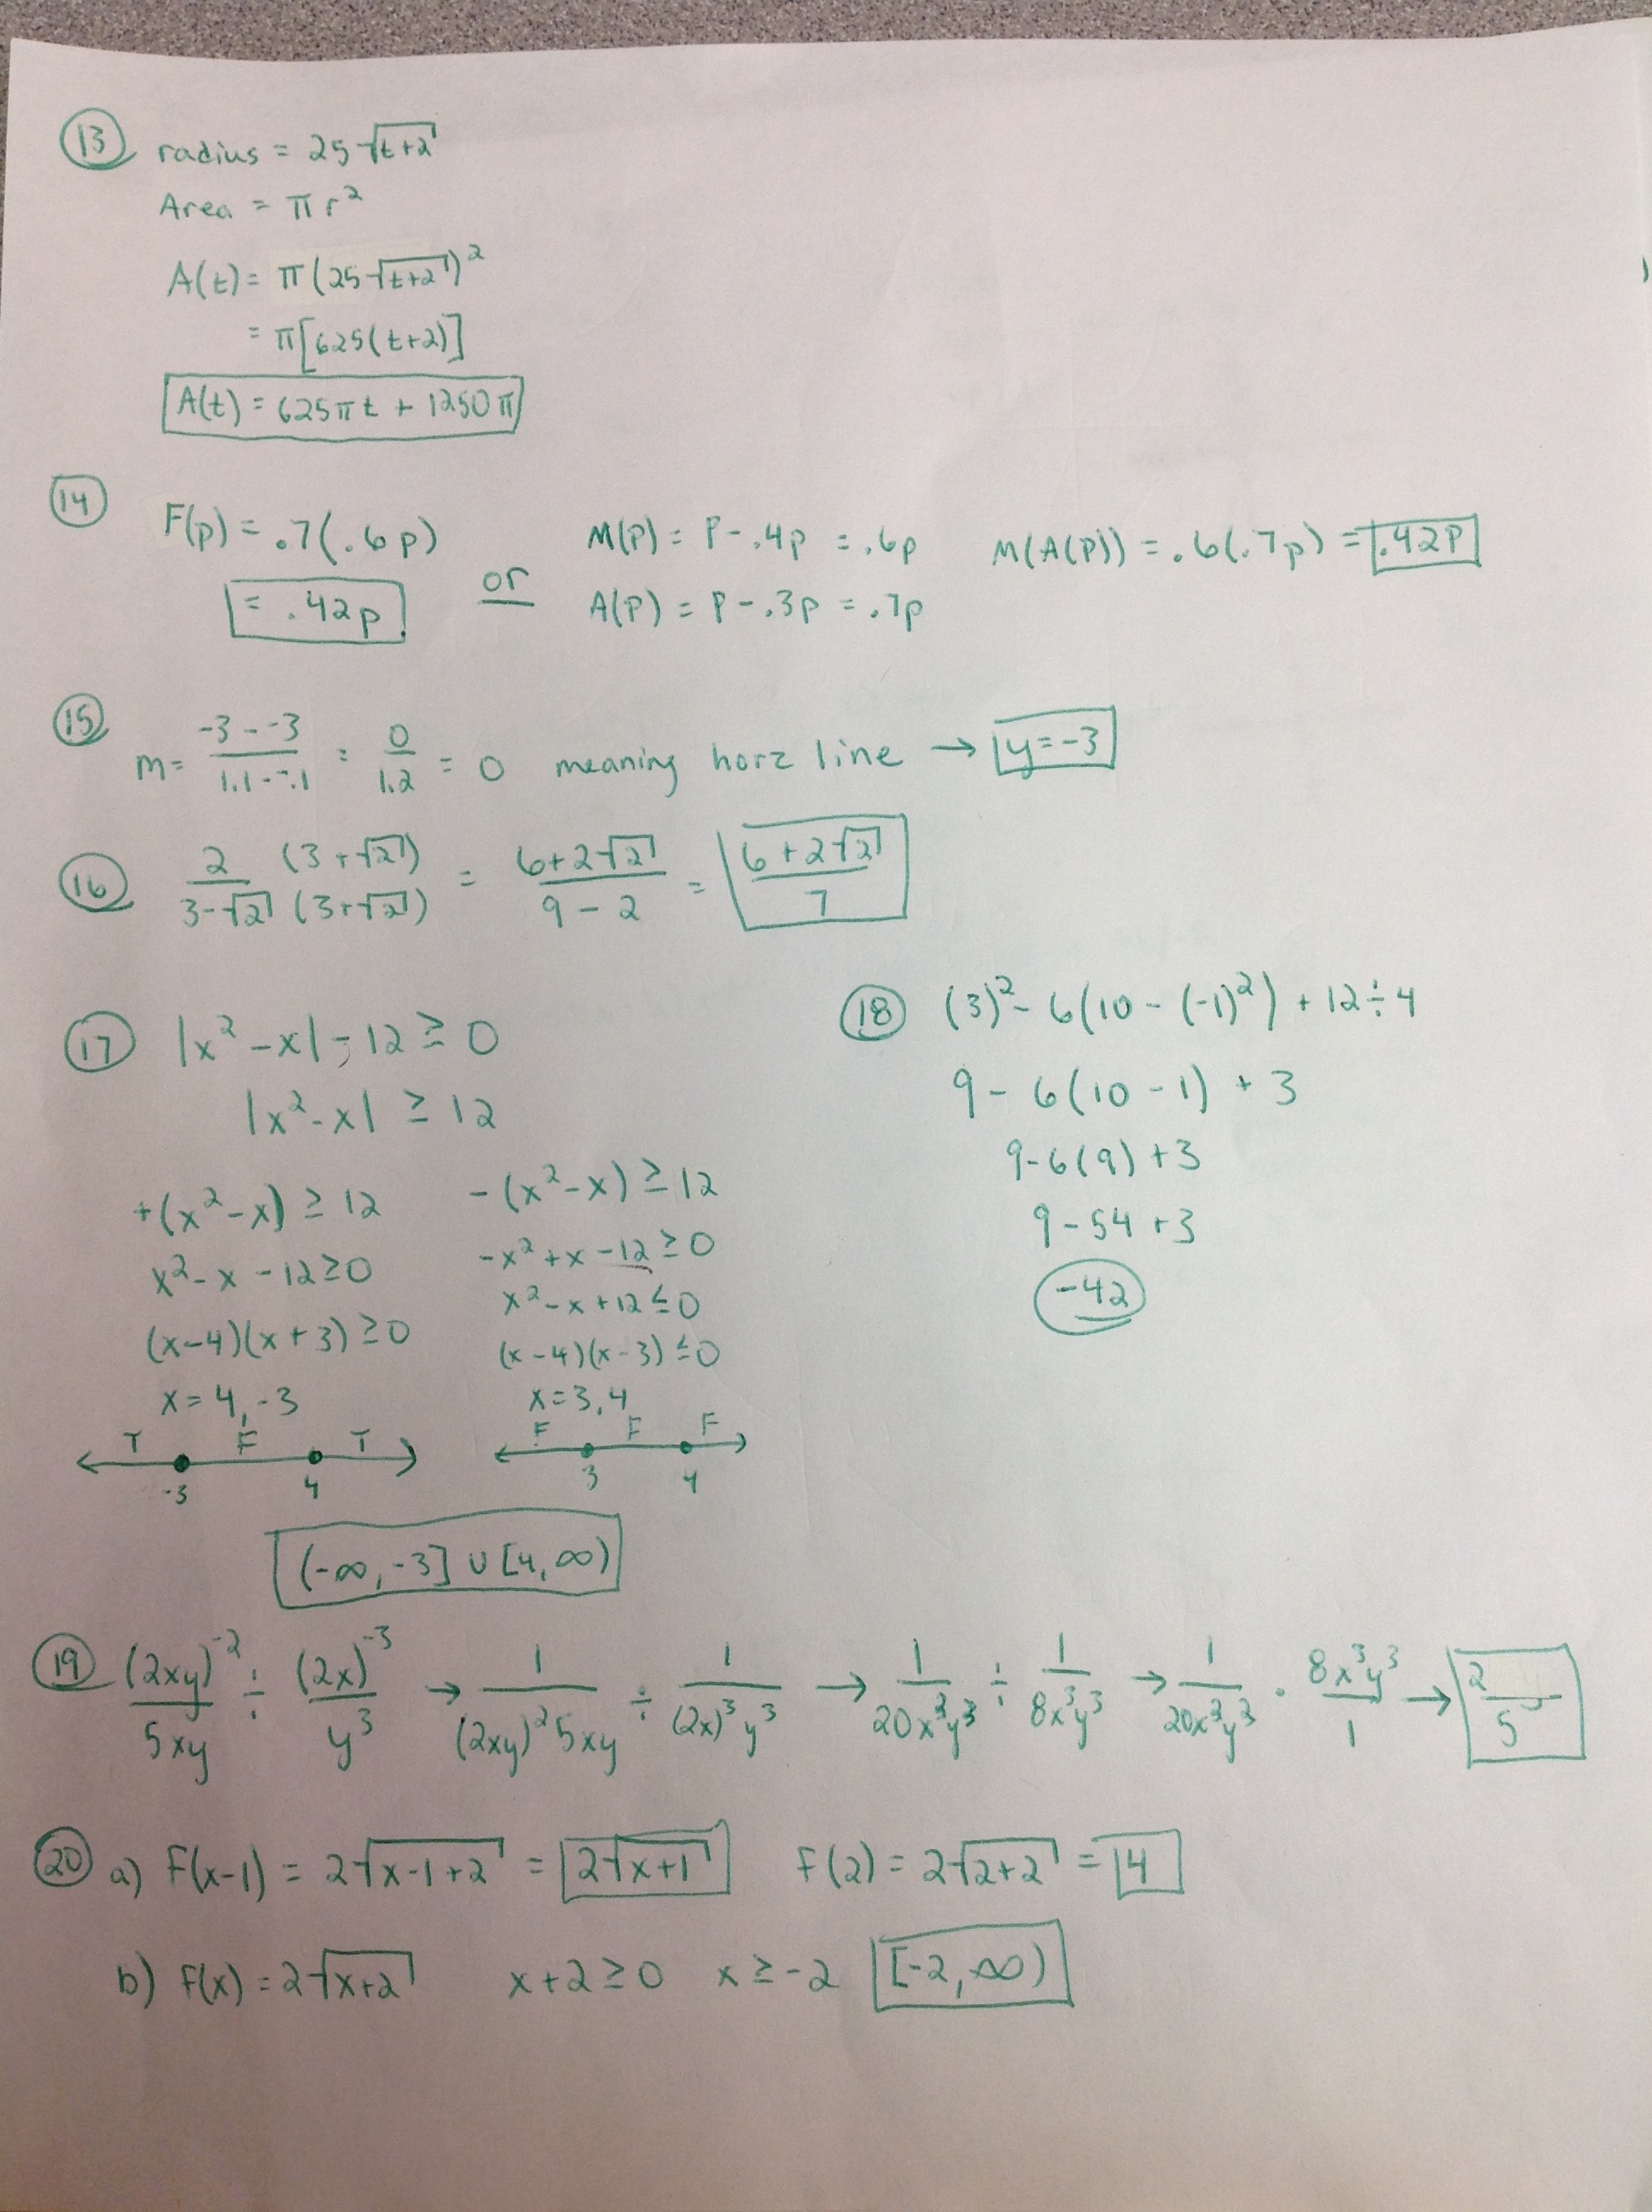 algebra-2-chapter-1-expressions-equations-and-inequalities-answers